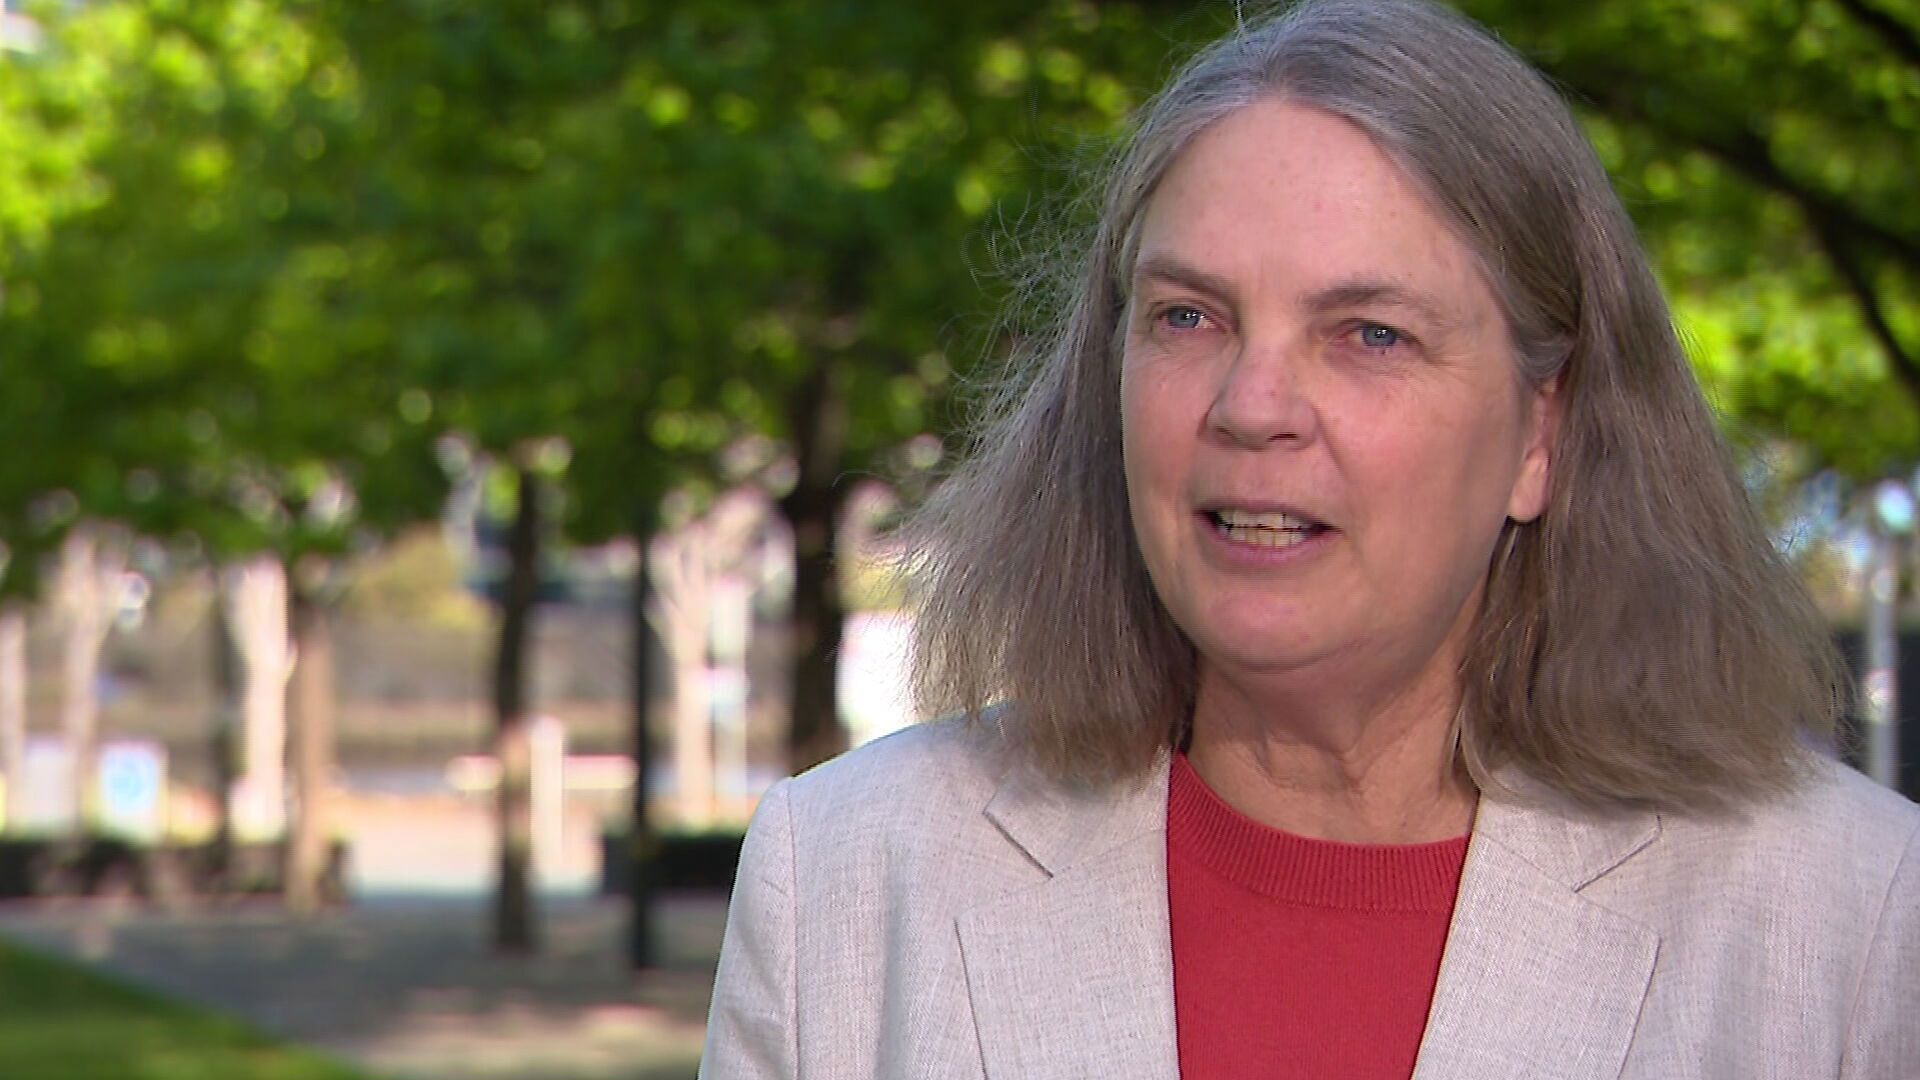 University of Tasmania Professor and Air Rater creator Fay Johnston said air quality can also impact our health, especially in hotter weather.